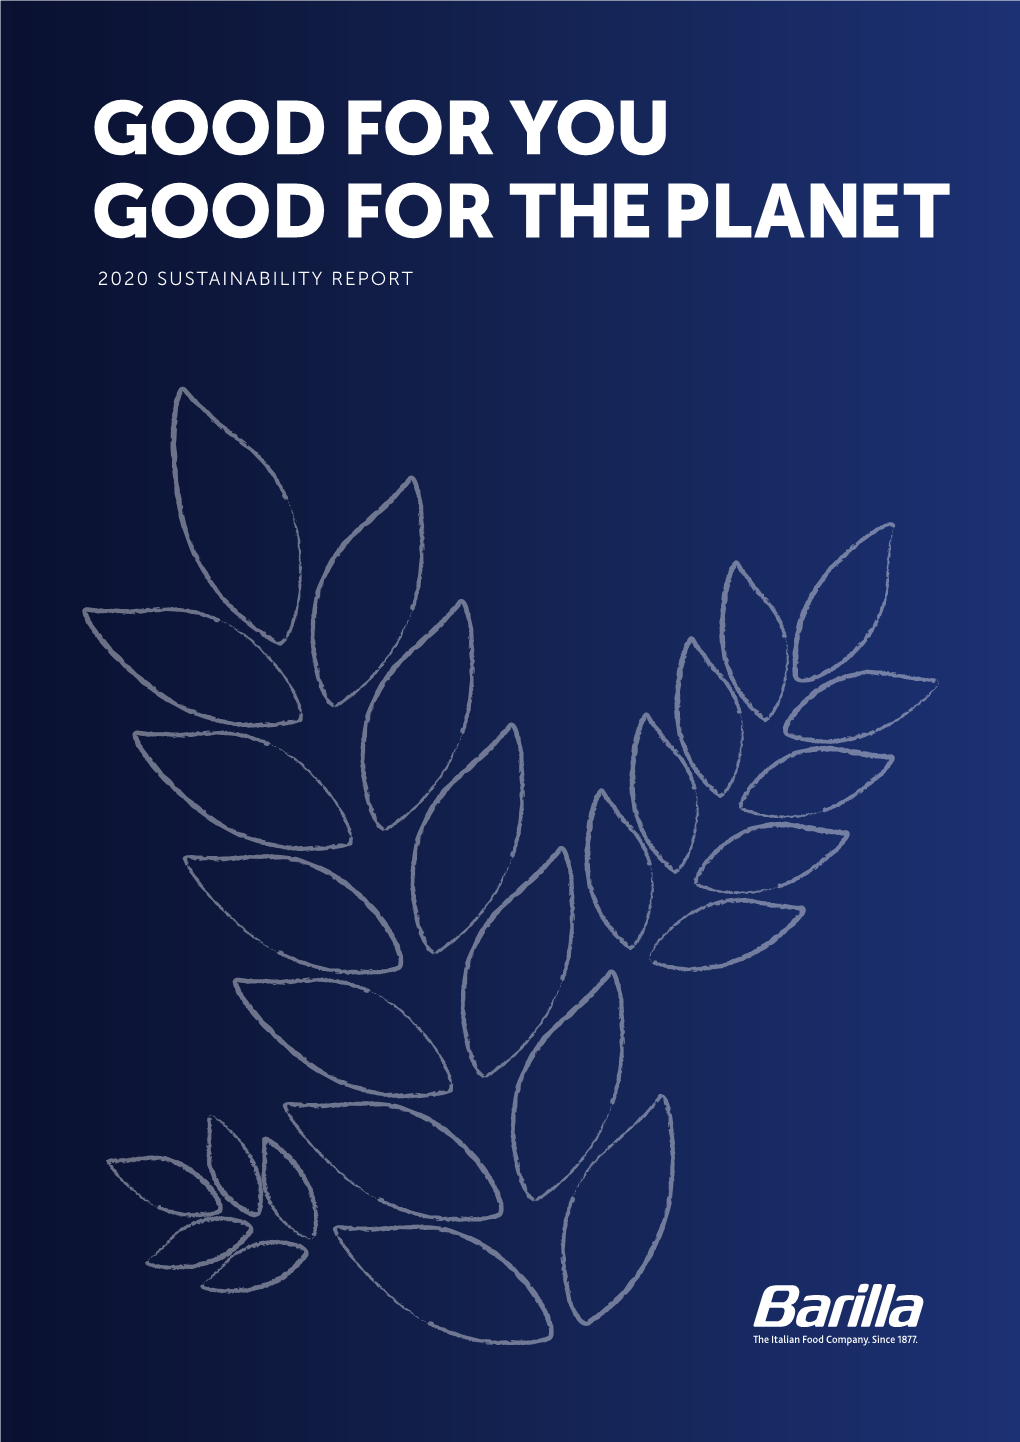 “Good for You, Good for the Planet” Report